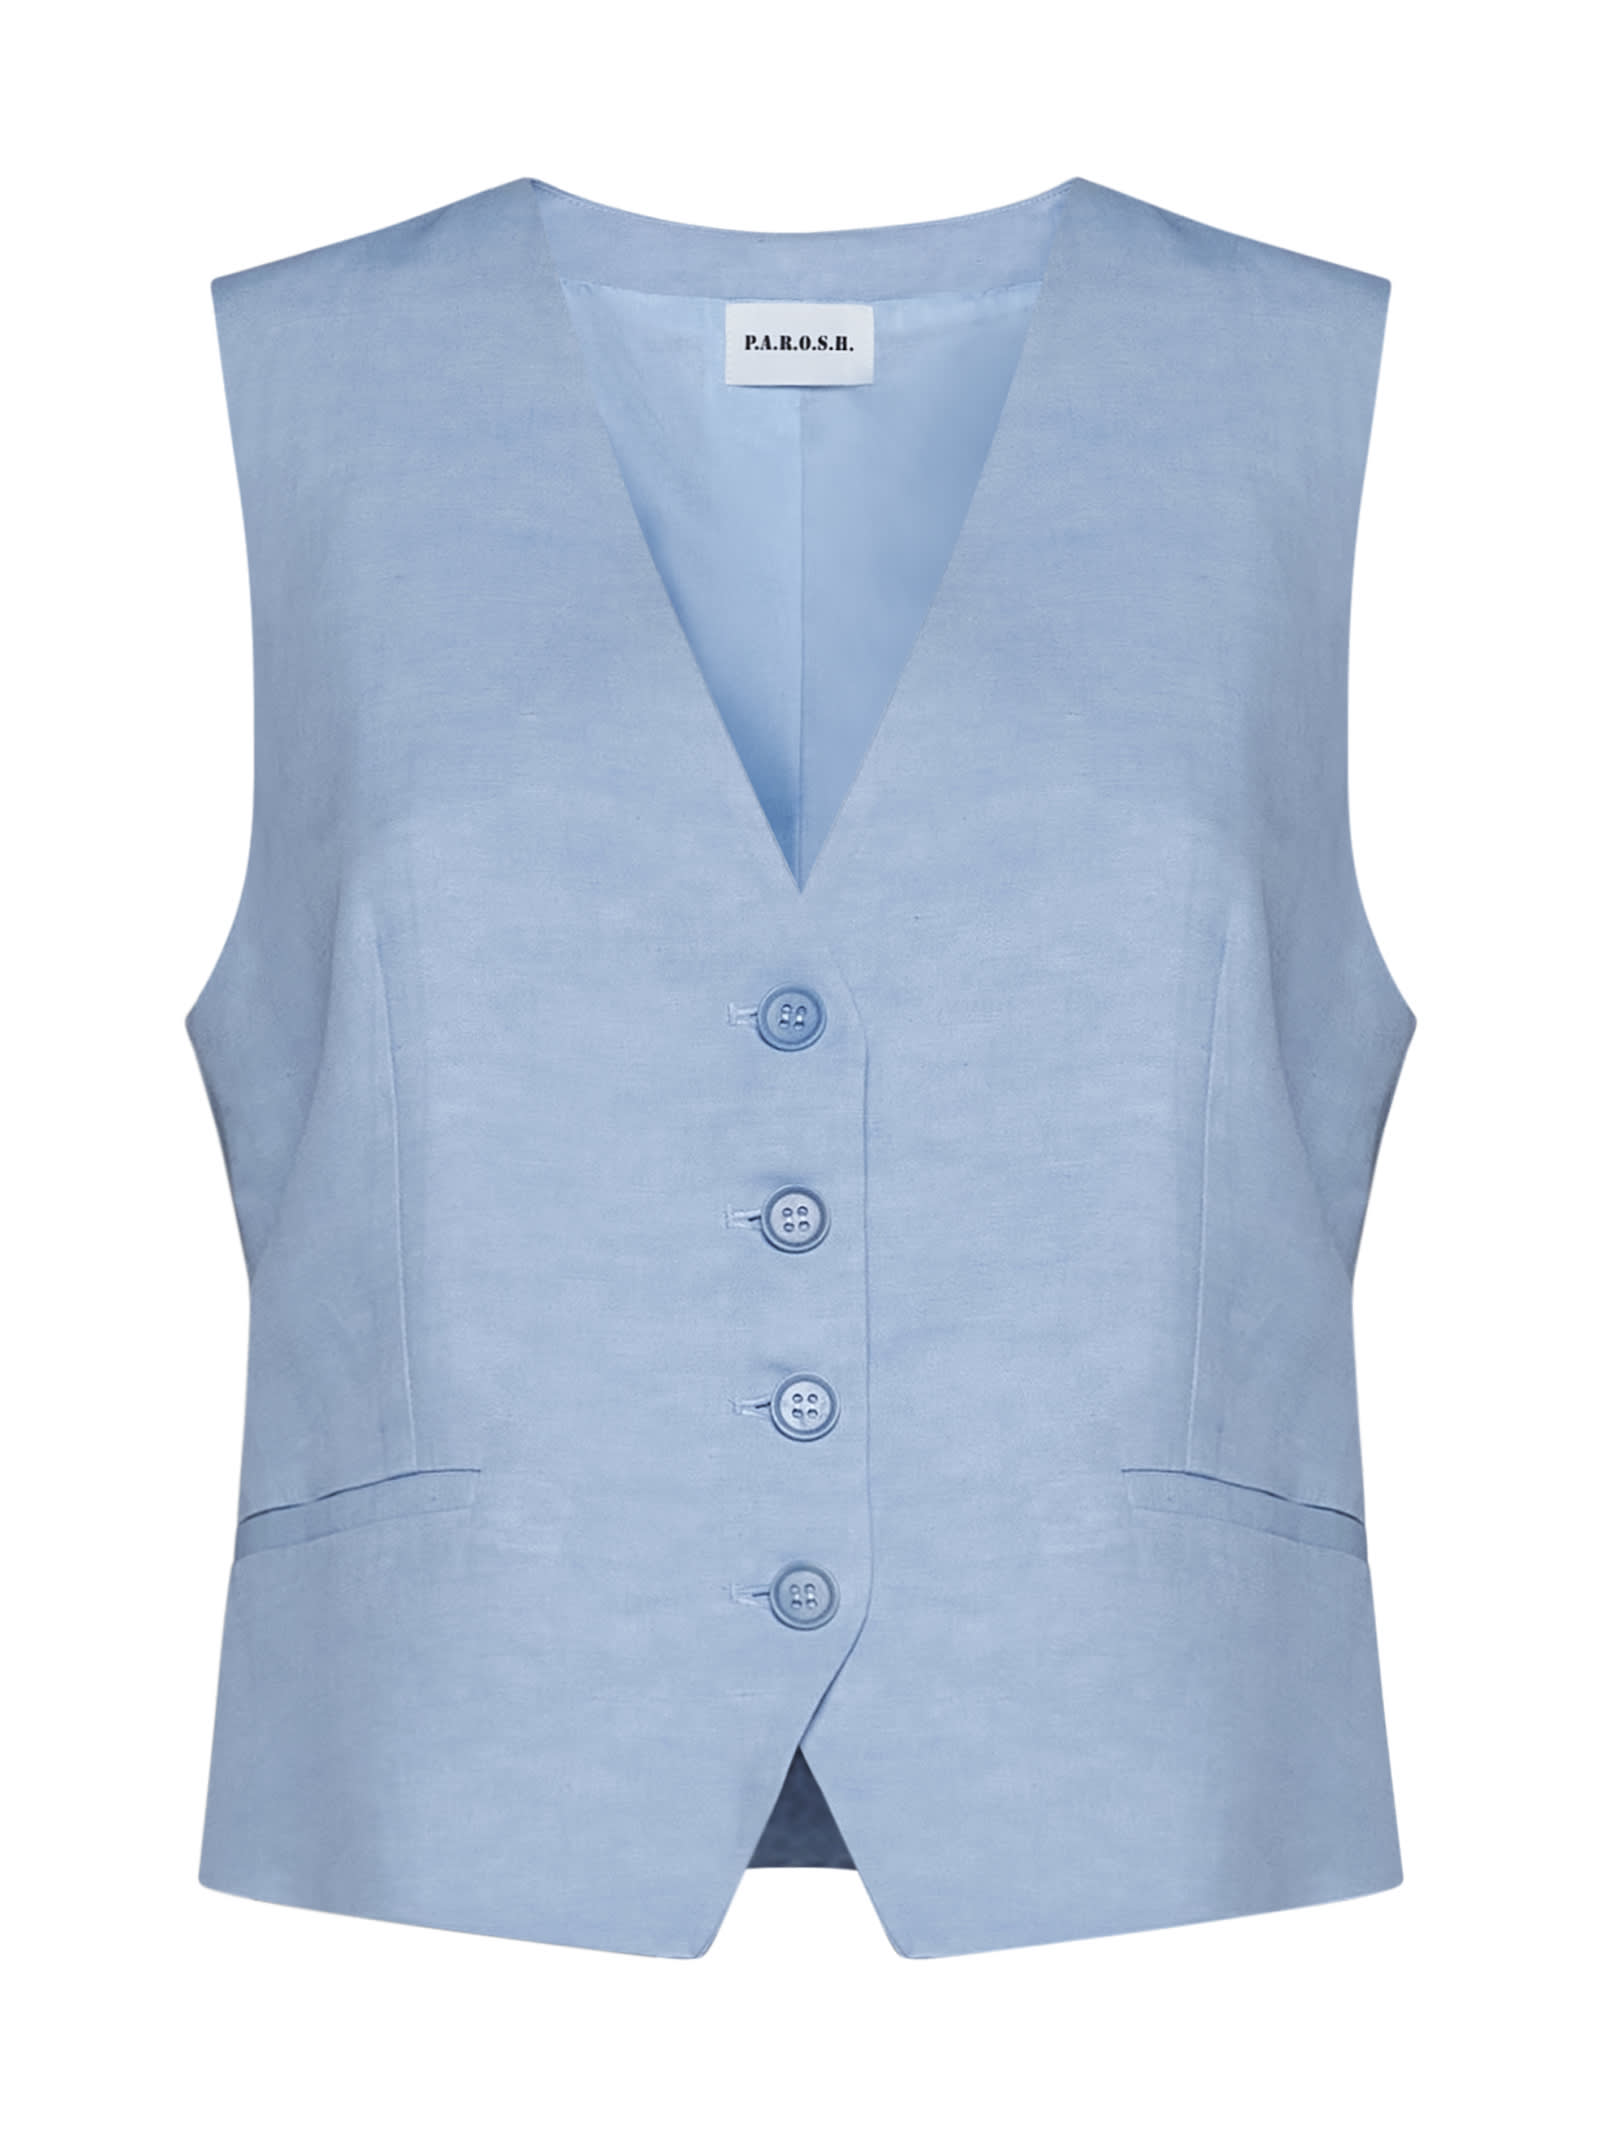 P.a.r.o.s.h Vest In Blue